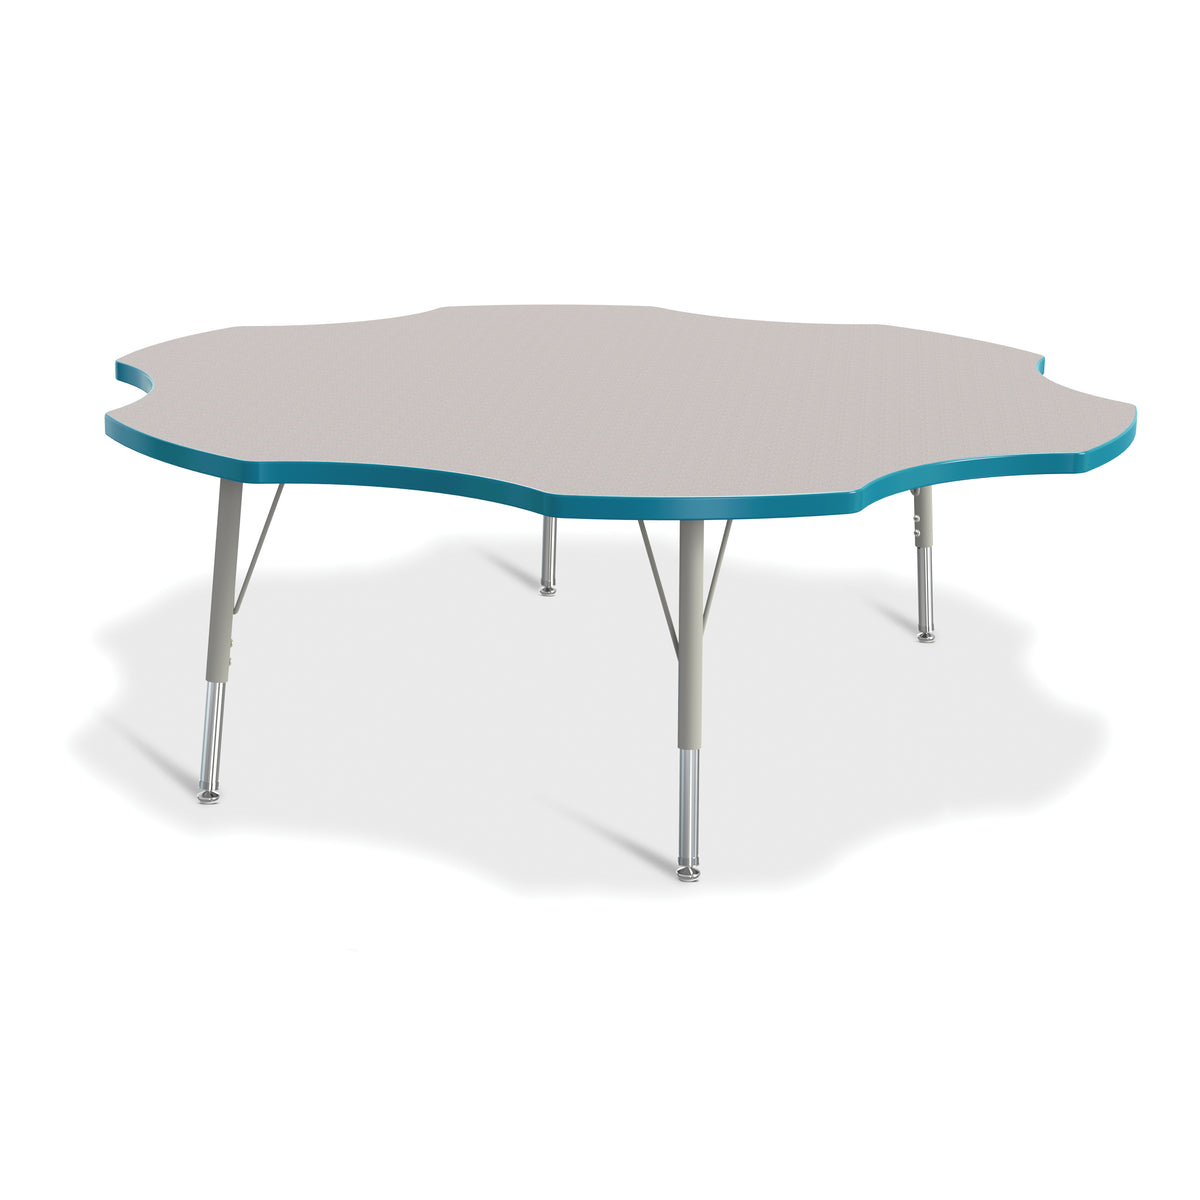 6458JCE005, Berries Six Leaf Activity Table - 60", E-height - Freckled Gray/Teal/Gray